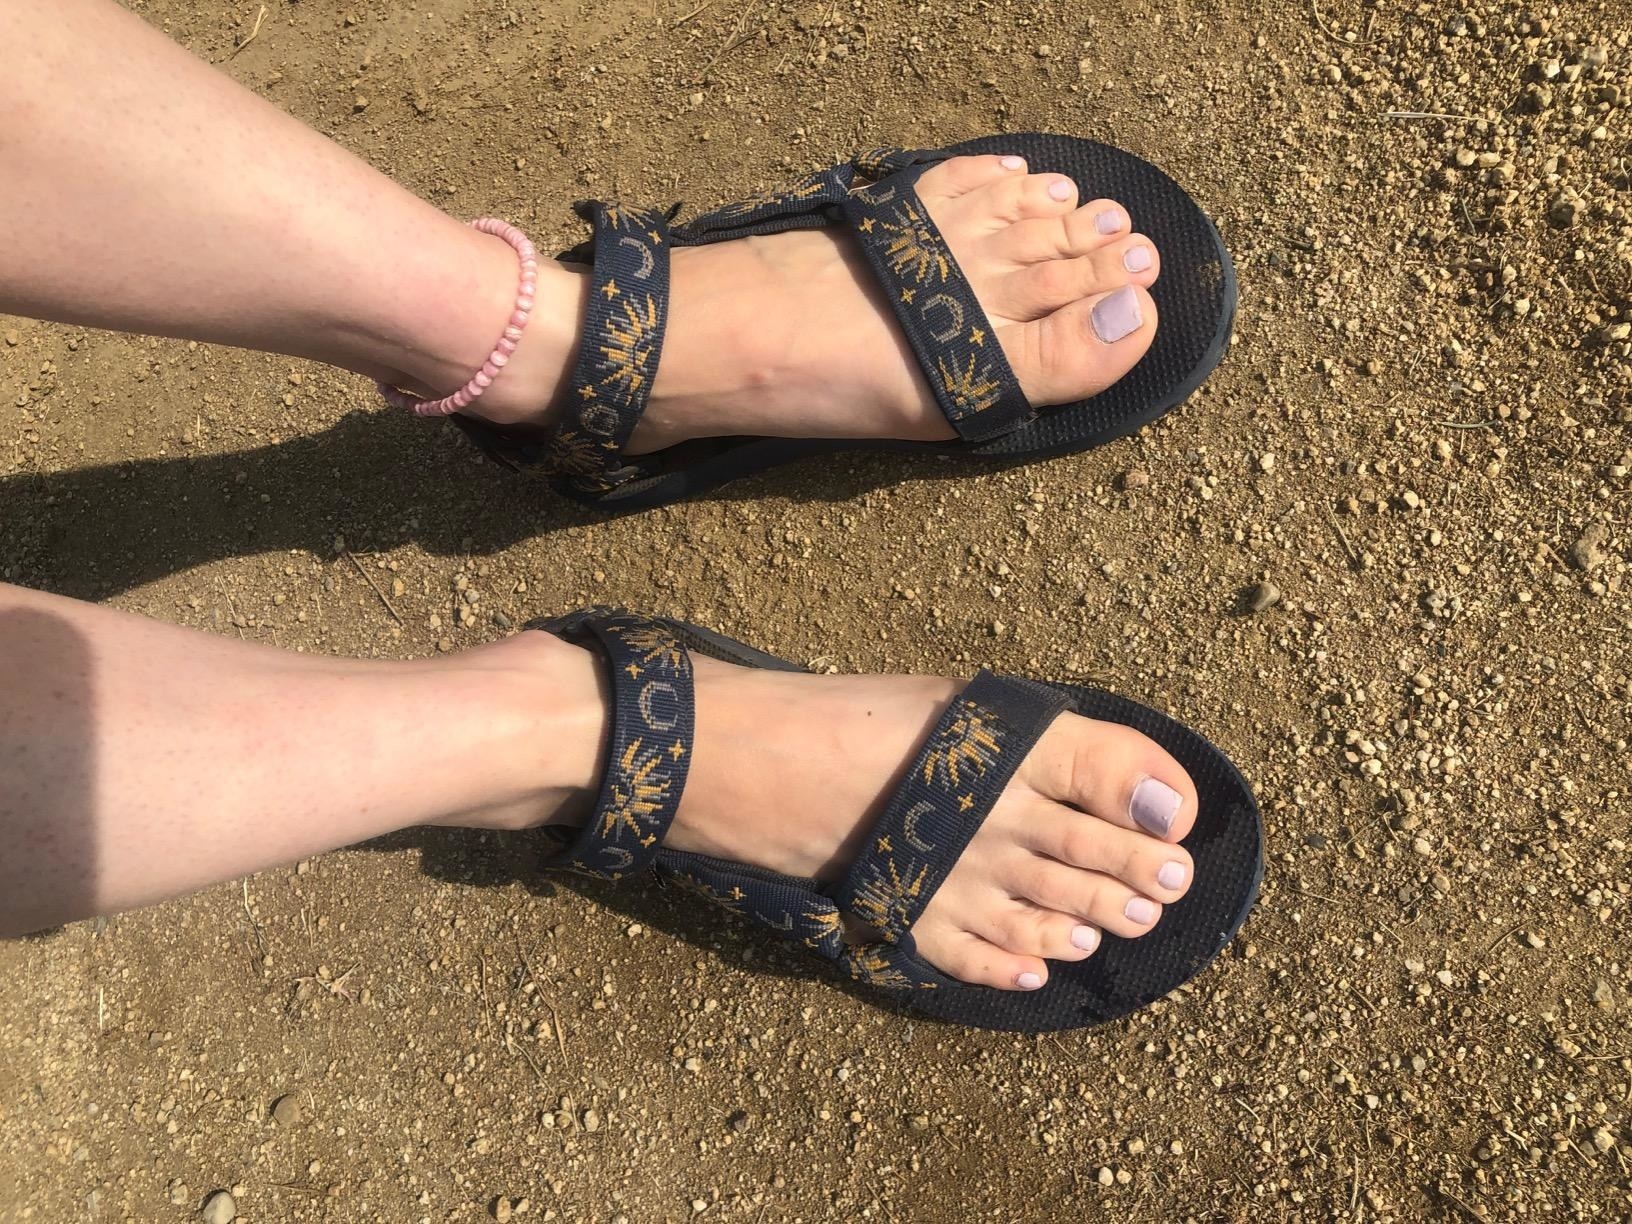 Reviewer wearing black tevas with sun and moon design on straps